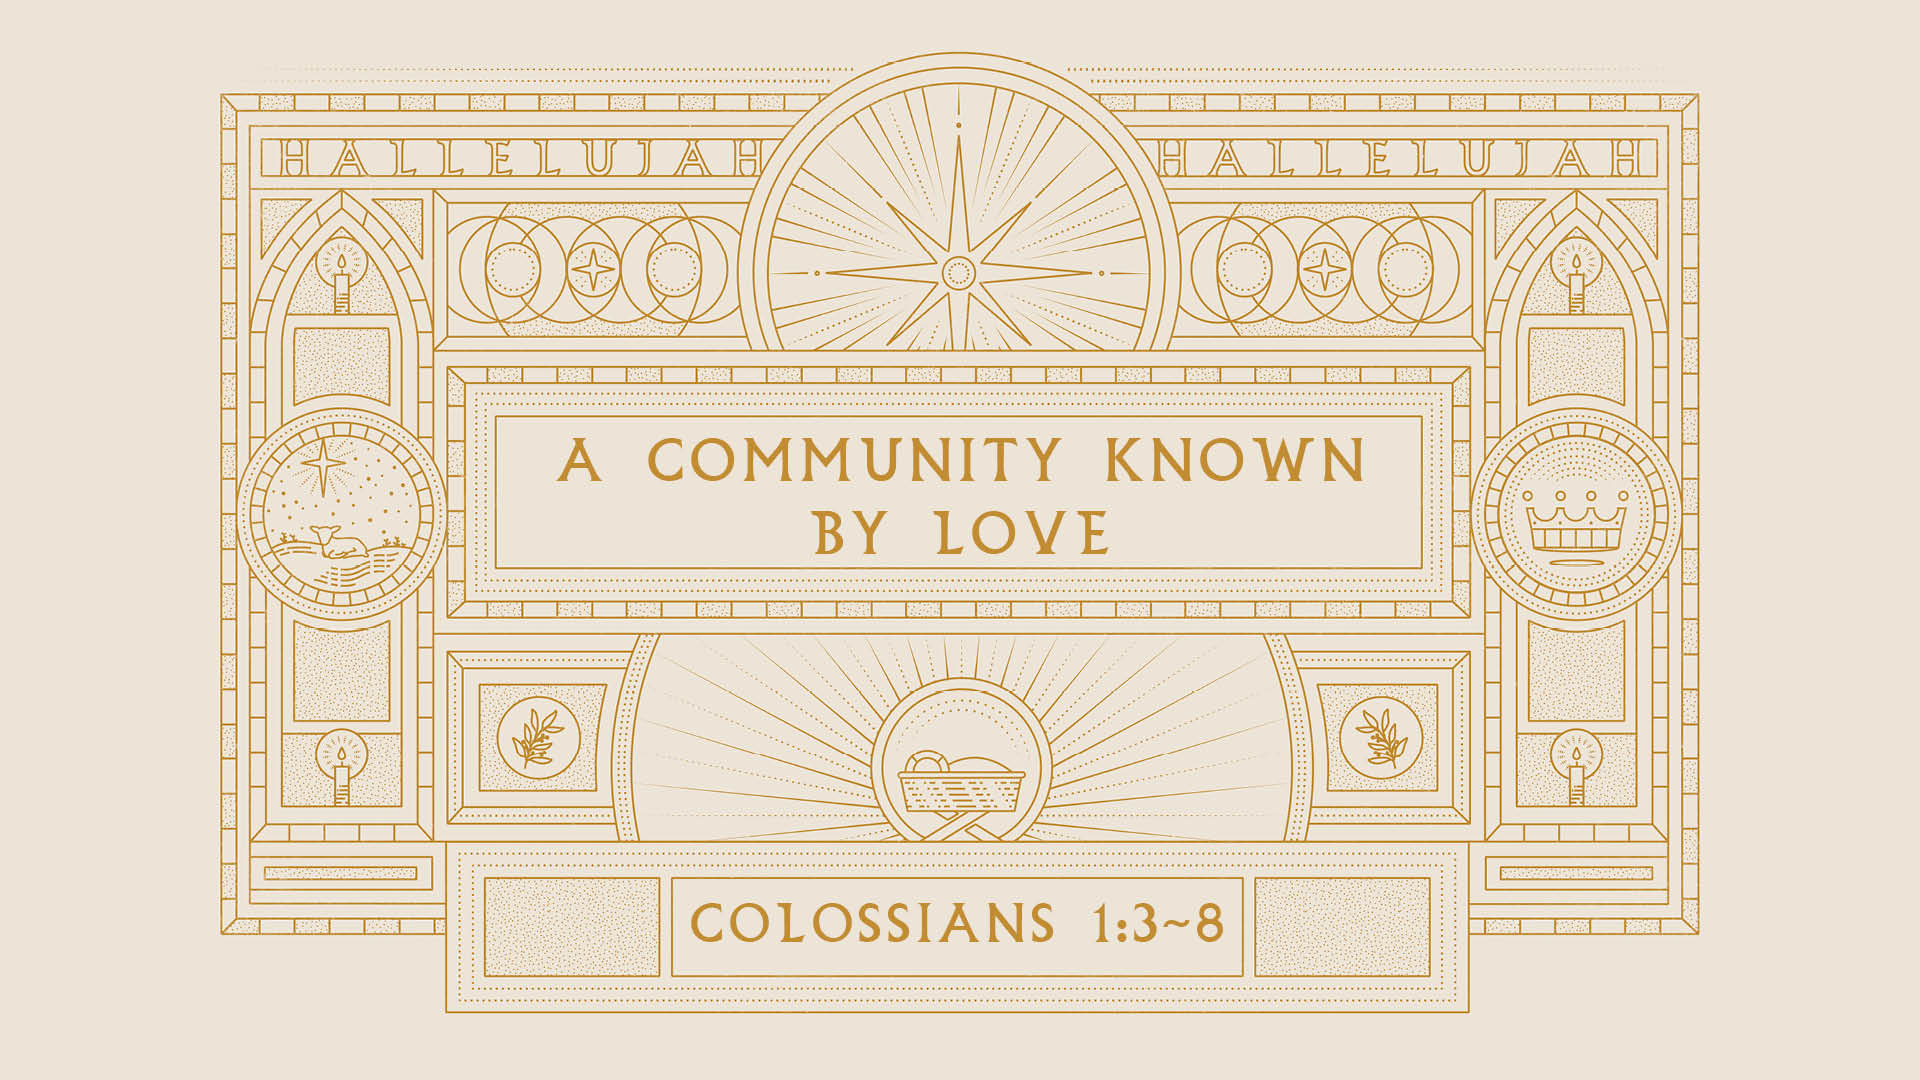 A Community Known by Love